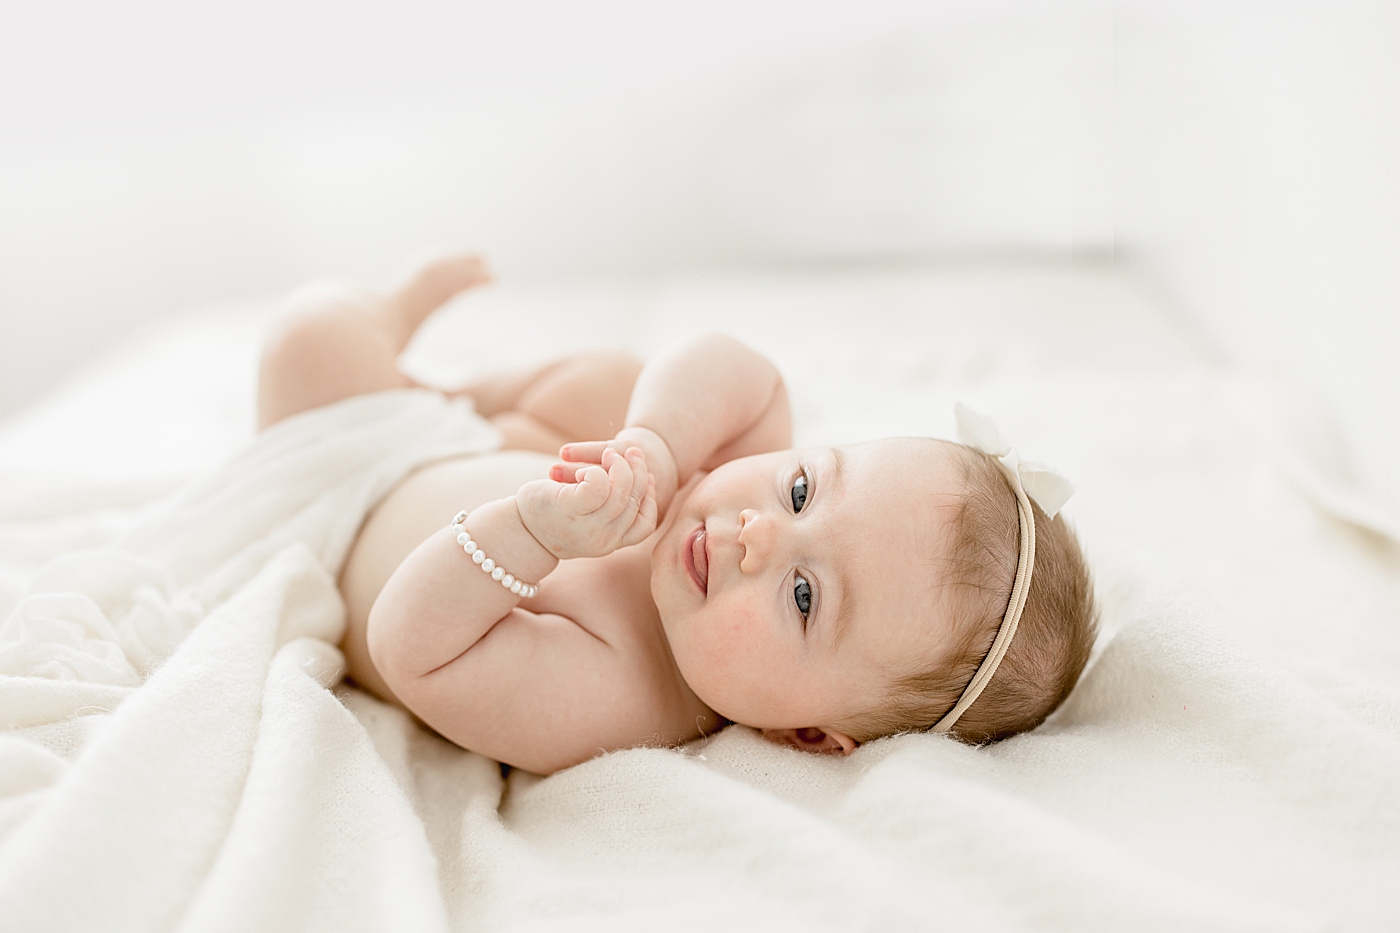 Studio milestone session for six month old baby girl. Photo by Brittany Elise Photography.